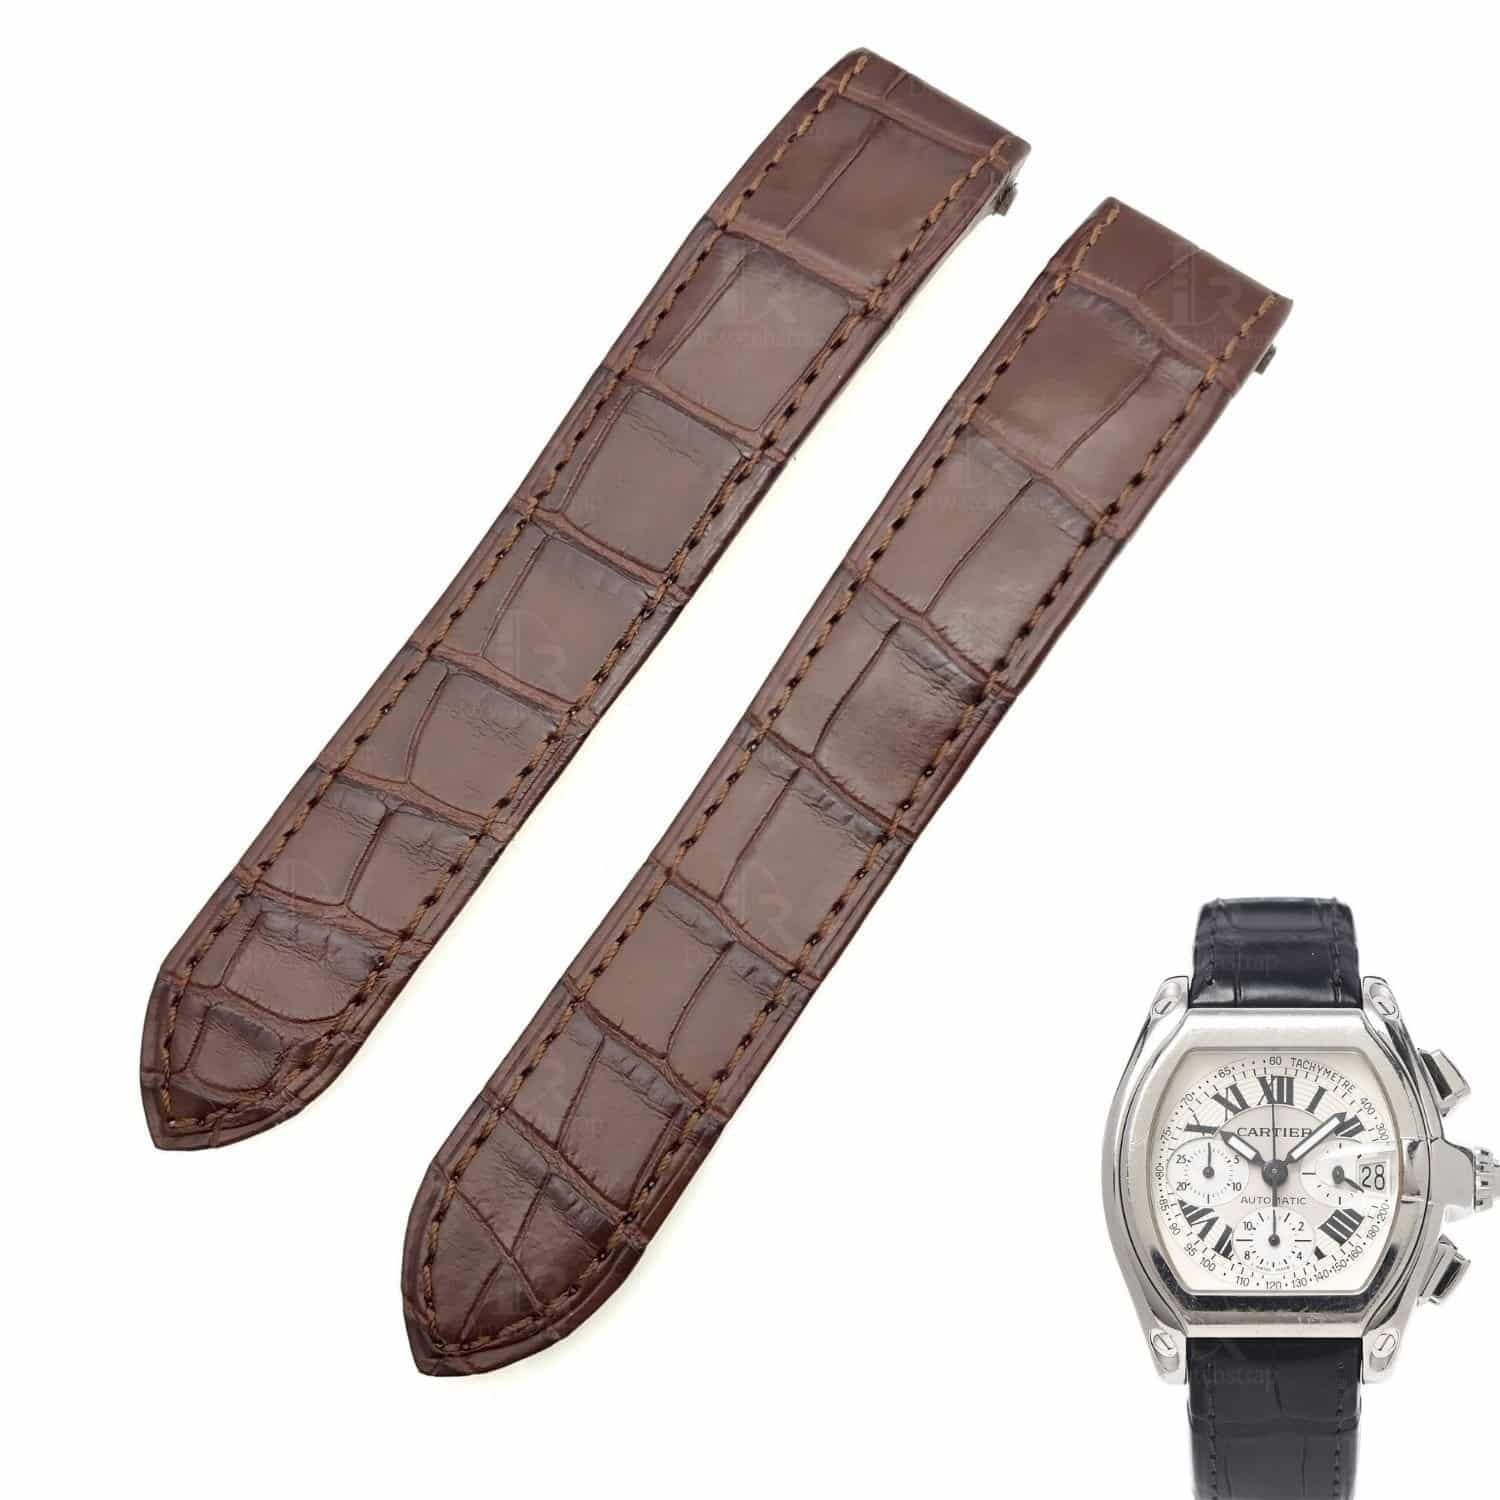 Custom Quickswitch genuine best Alligator Crocodile brown Belly-scale leather straps and watchbands replacement for Cartier Roadster 2510 xl 19mm 20mm watch with quick switch system for sale and easy to change between rubber, kevlar and bracelets straps for mens and womens - Quick release leather strap and watch band from DR Watchstrap free shipping to US, UK and whole world